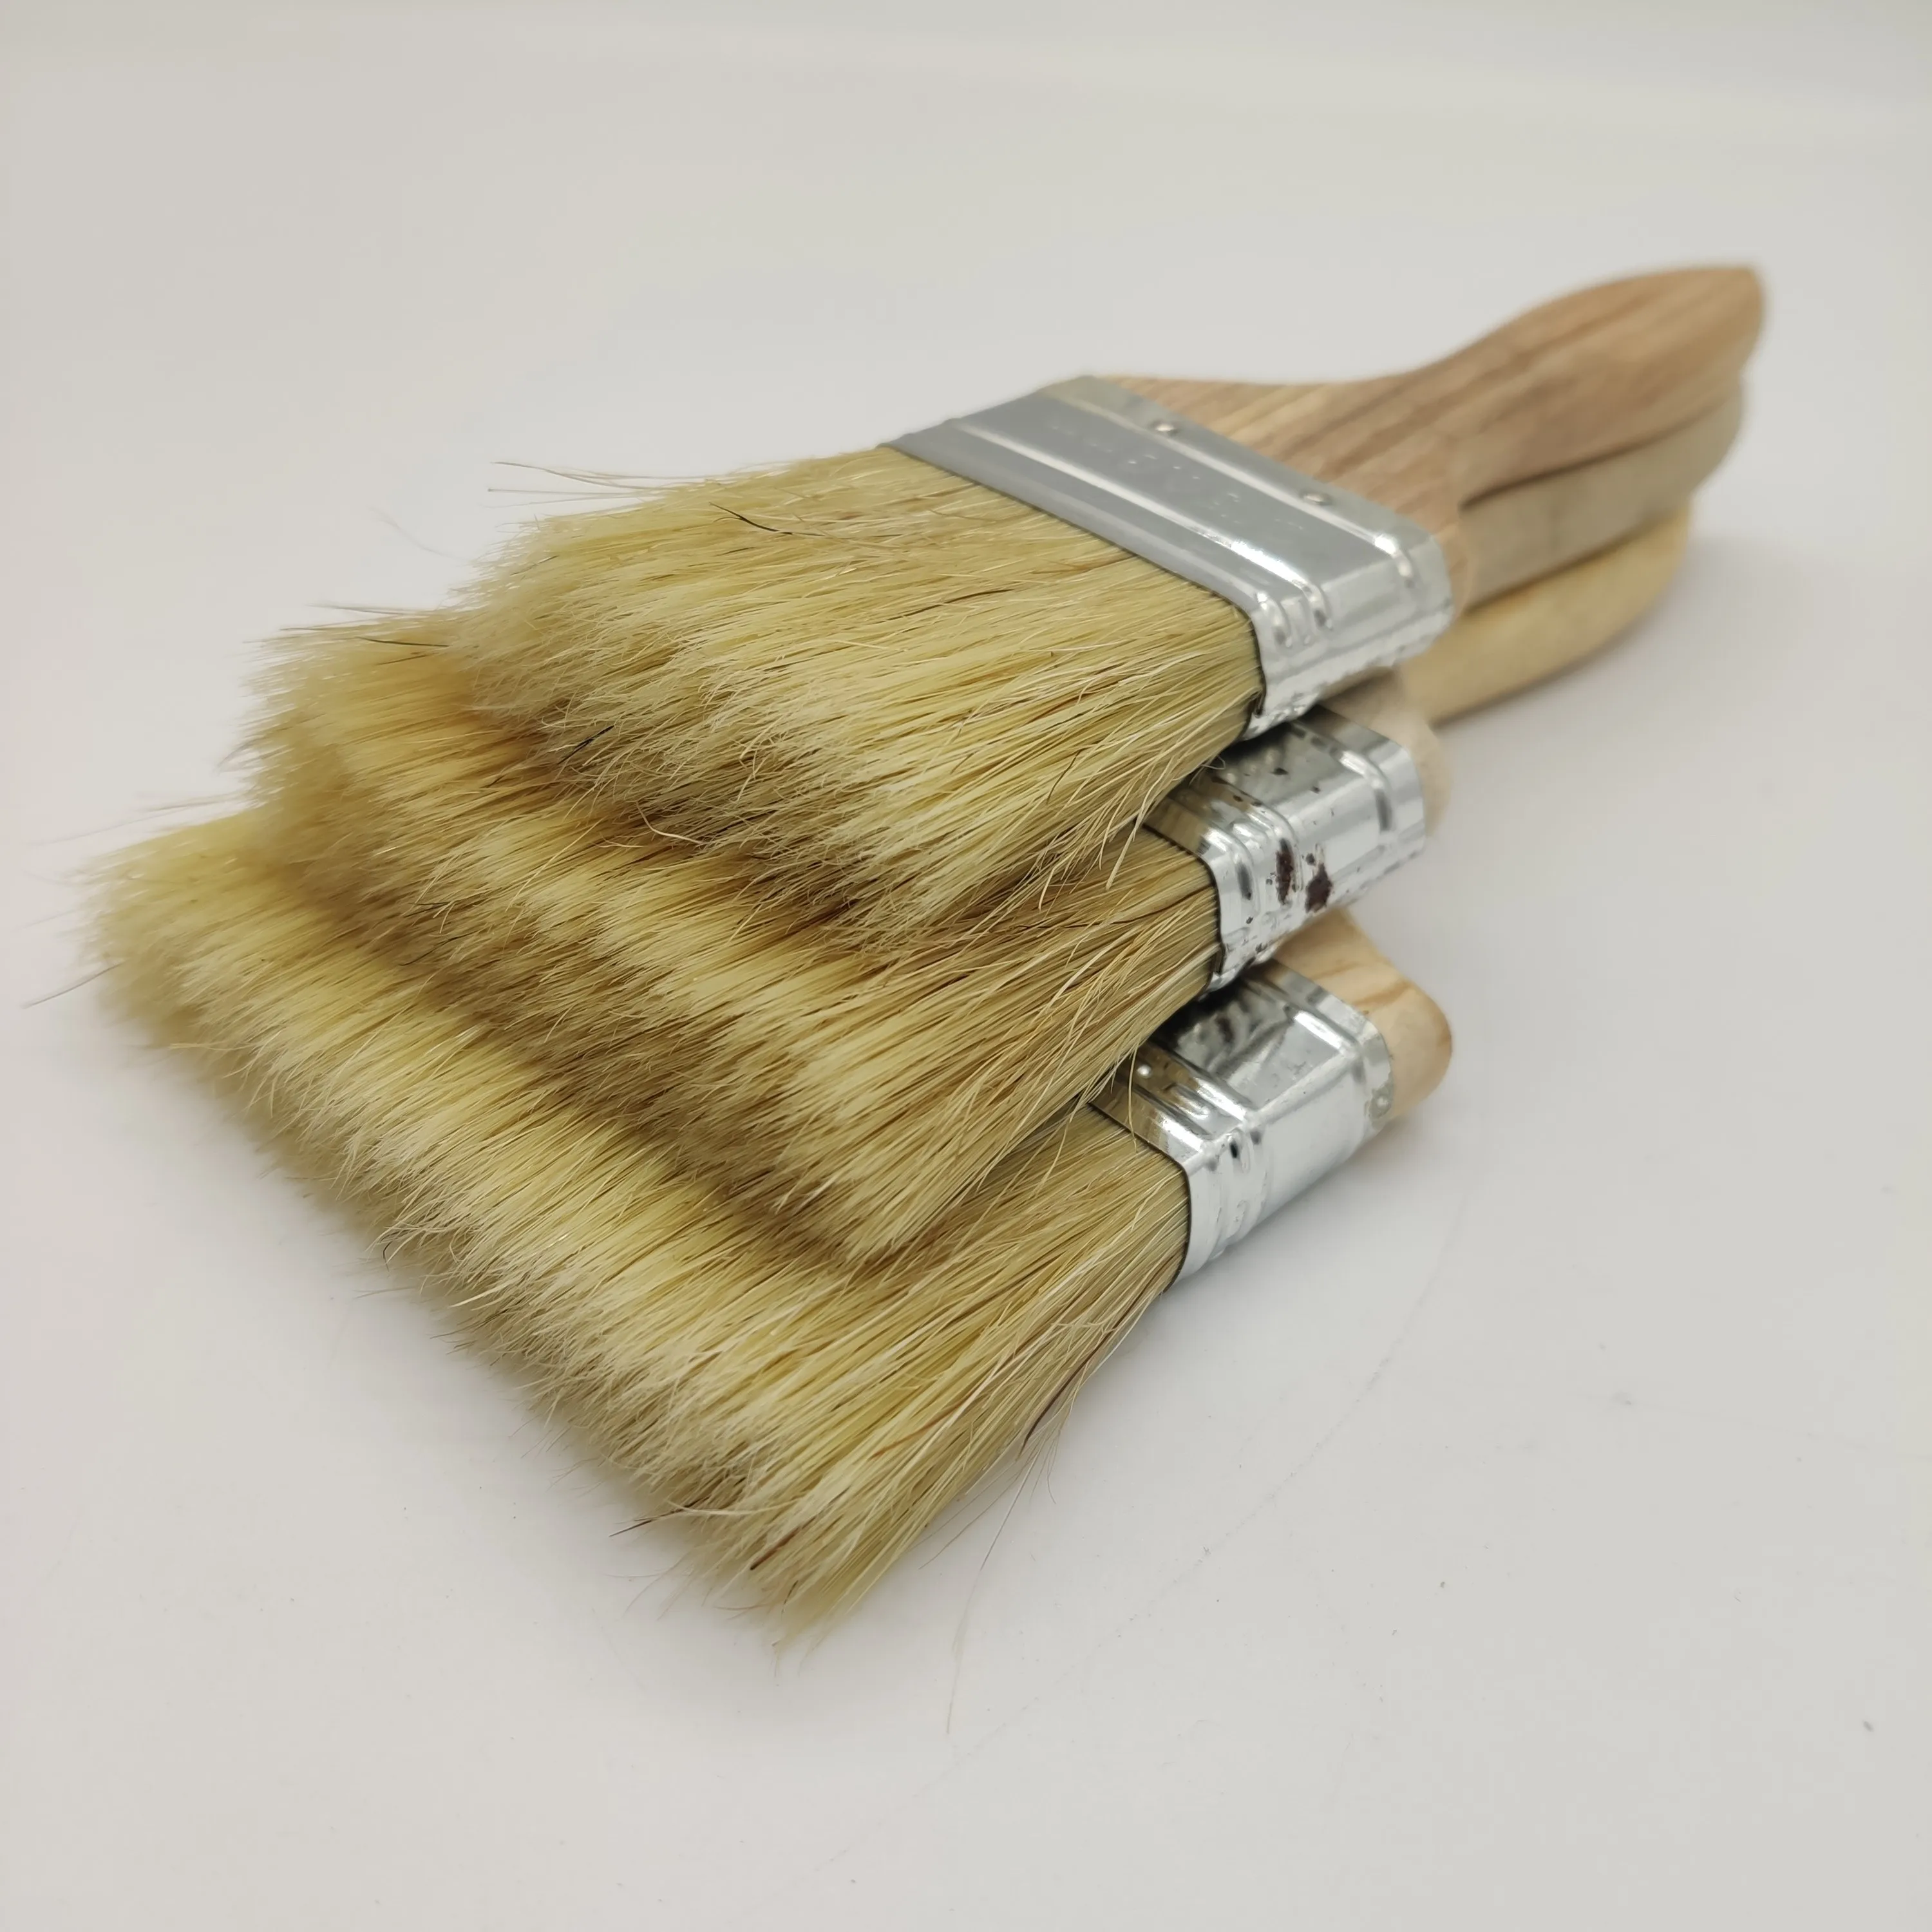 Wholesale high quality natural bristle chip paint brushes with cheap prices